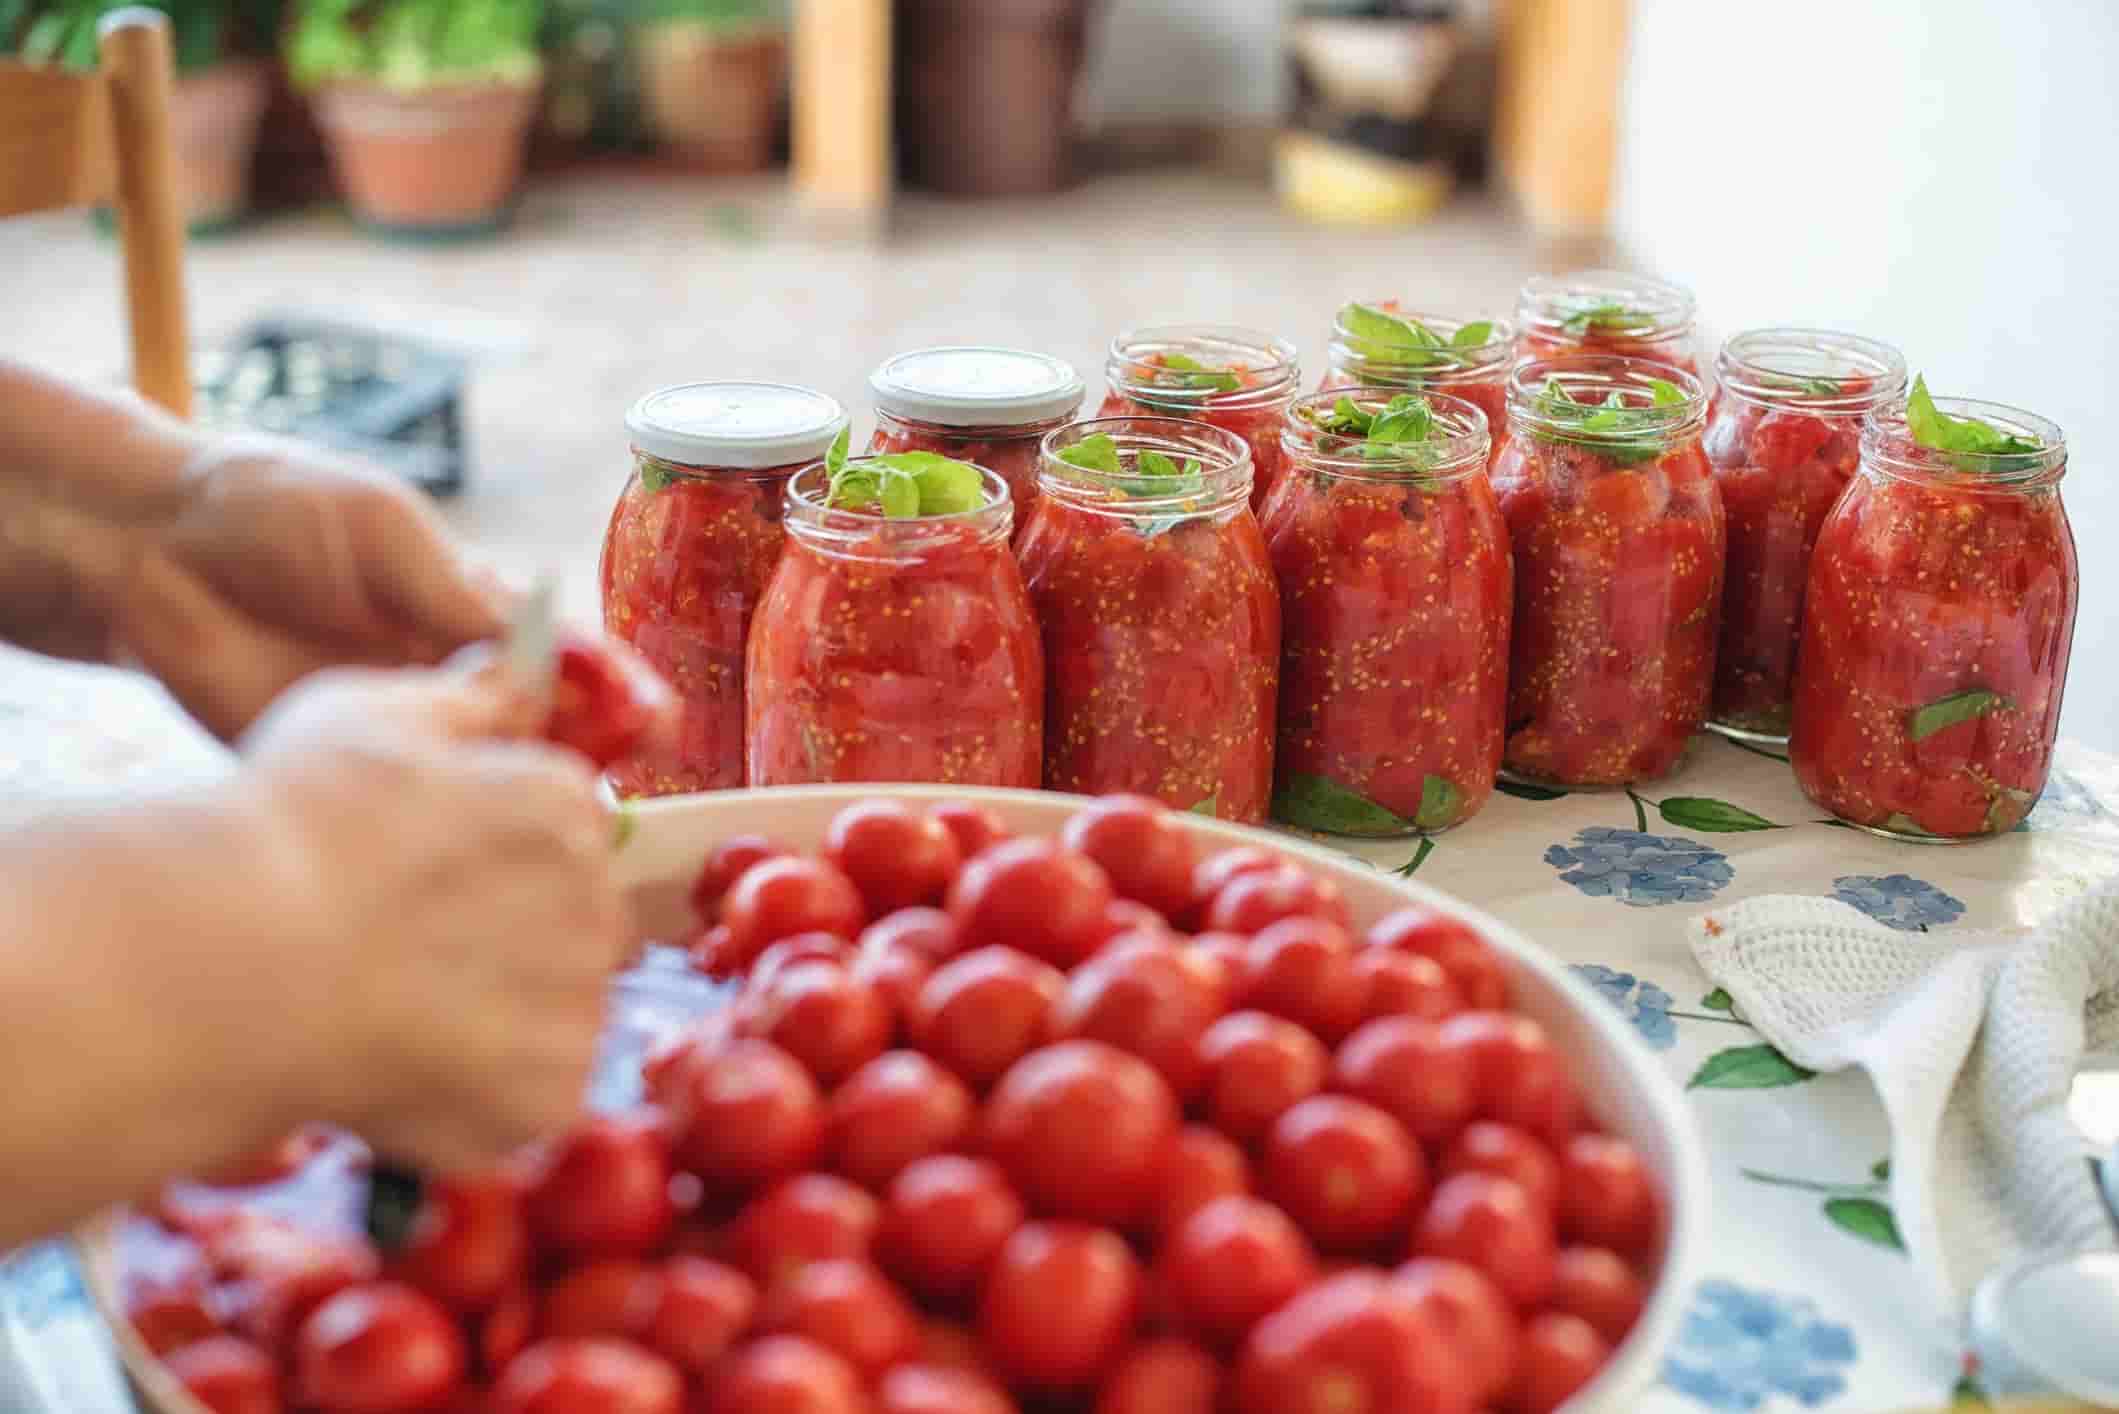 How to preserve tomatoes without canning